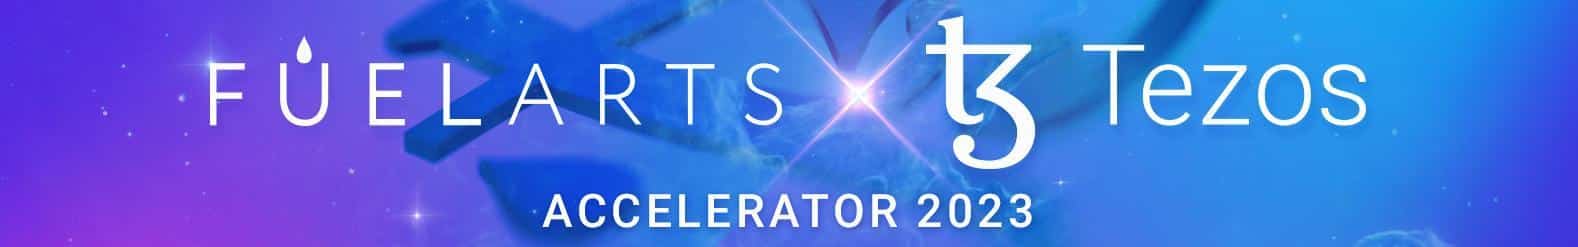 FUELARTS launches new acceleration program powered by Tezos, the leading energy-efficient blockchain